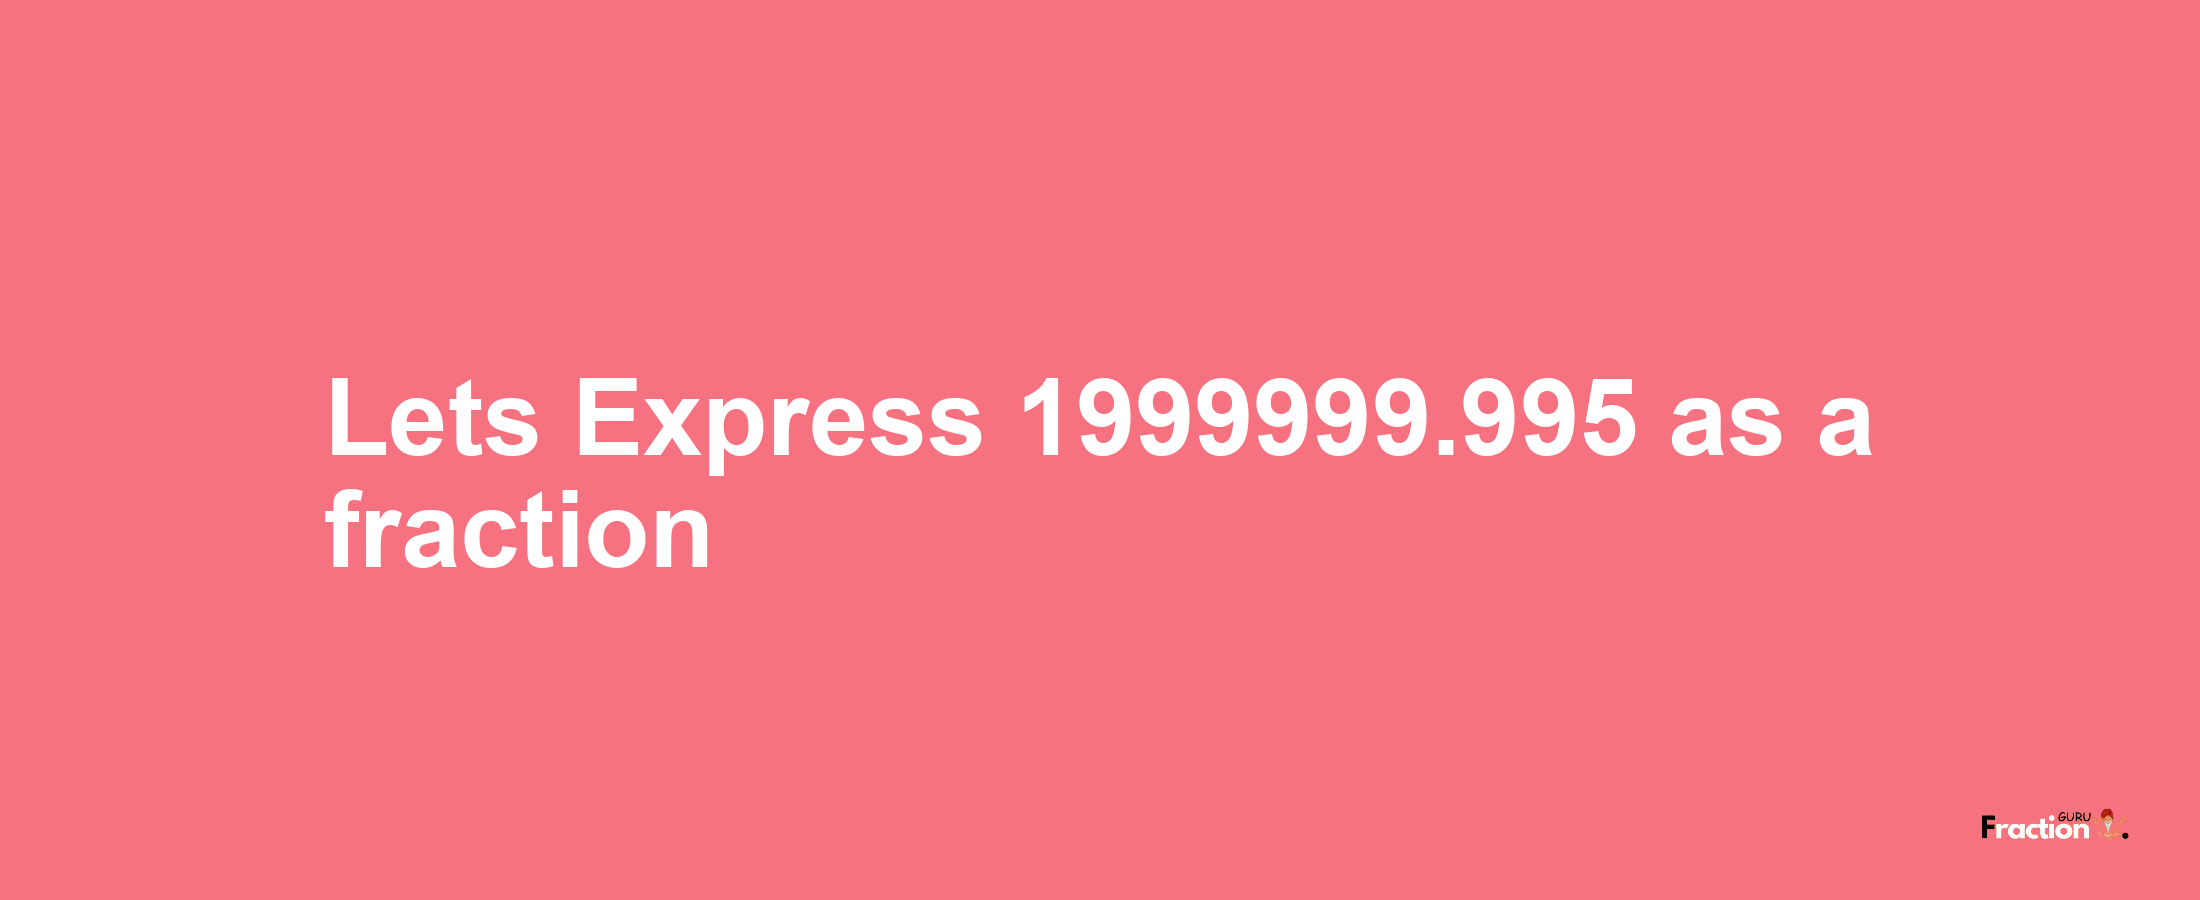 Lets Express 1999999.995 as afraction